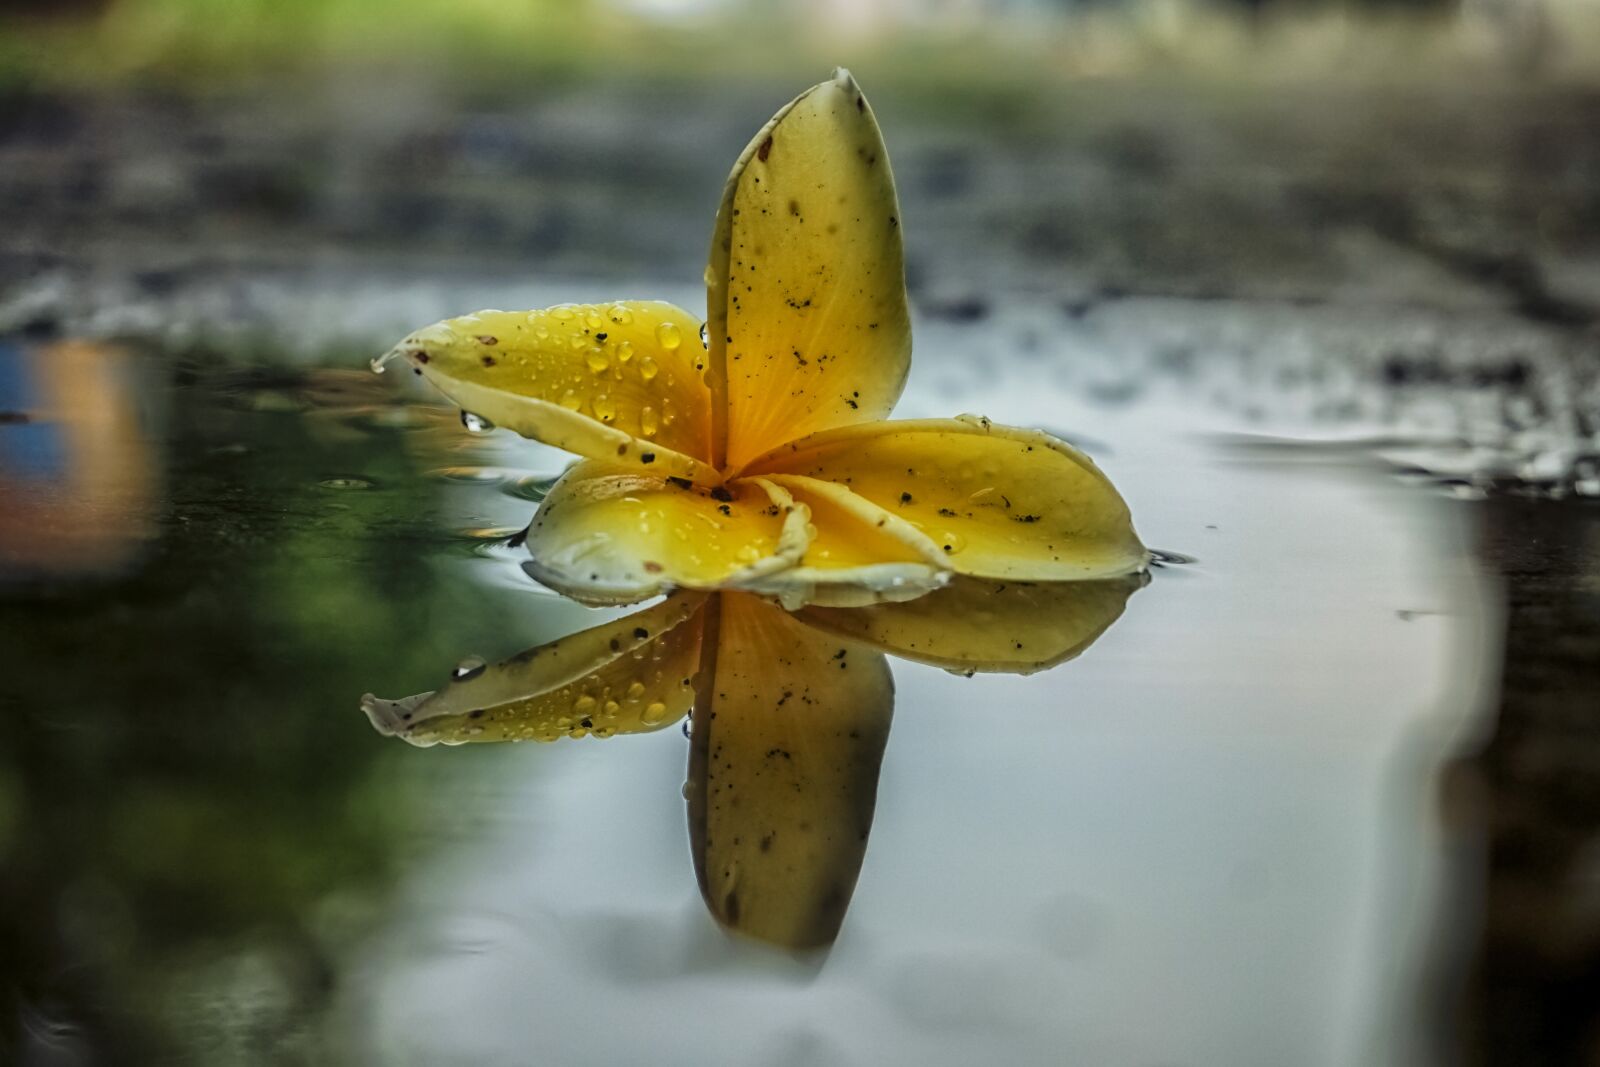 Sony a6000 sample photo. Flower, reflection, nature photography